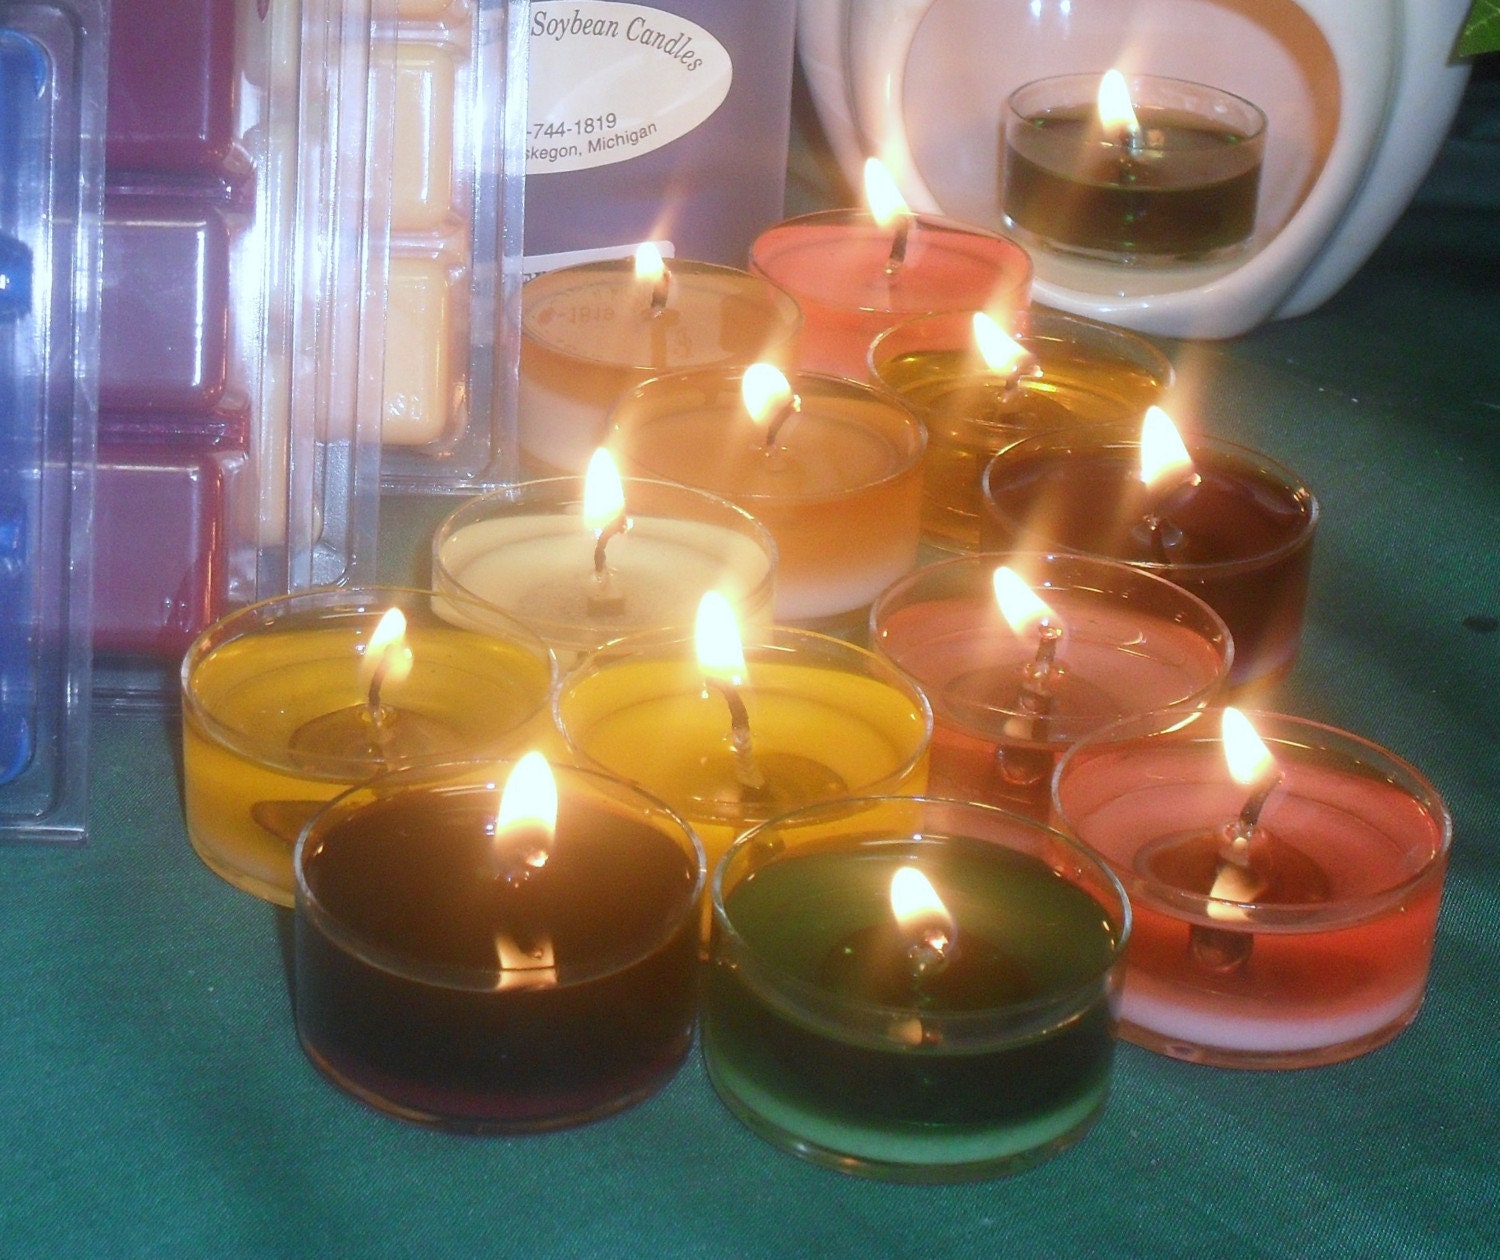 GREAT LAKES SOYBEAN CANDLES 12 T-LITES 6-99 ALL SOY ANY SCENT  BURNTIME 6-8 HOURS EACH